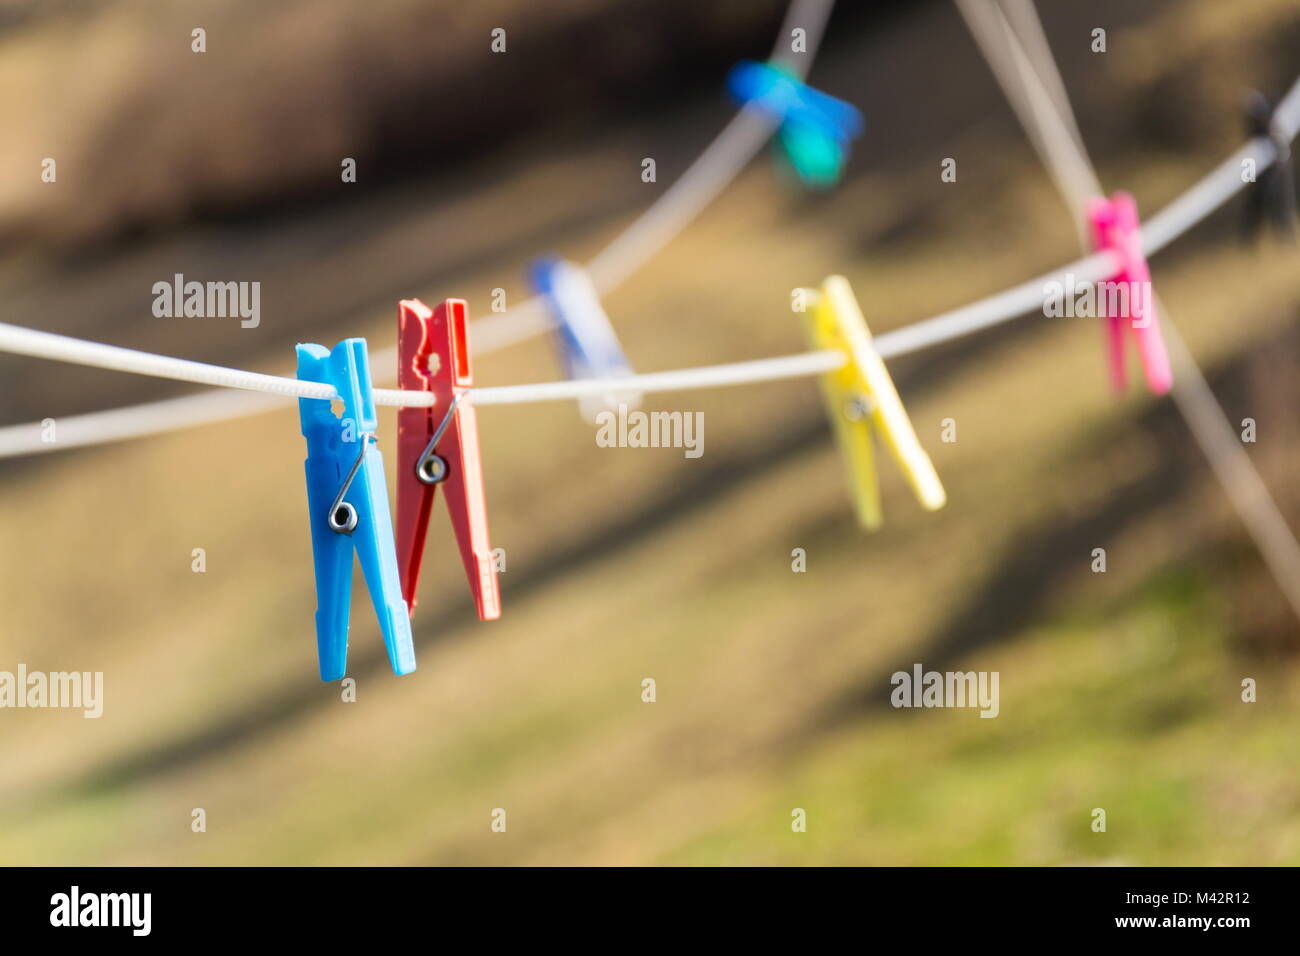 Colorful plastic clothes pegs on white clothesline, fashion business concept Stock Photo